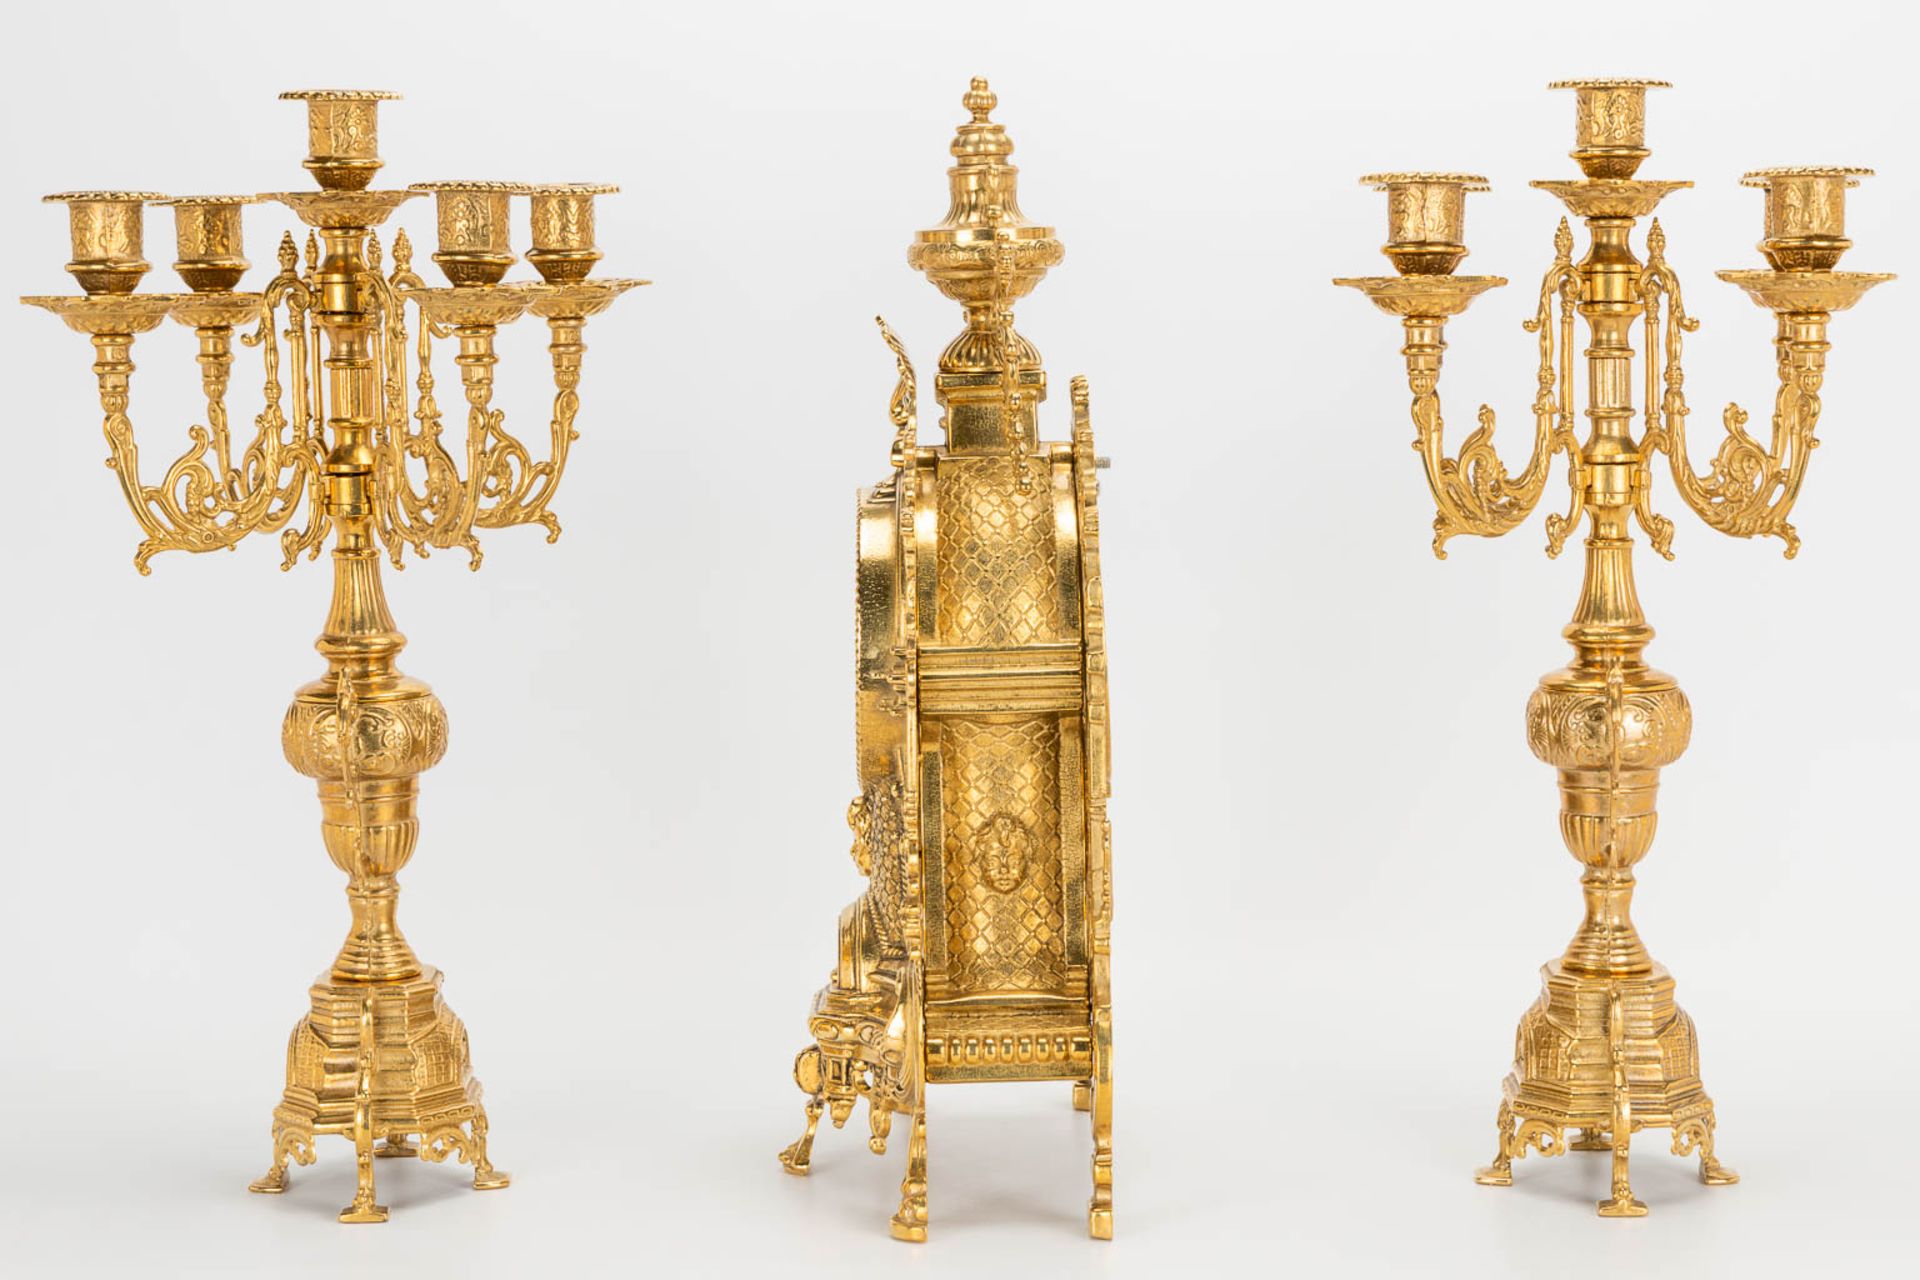 A 3 piece garniture clockset made of bronze, consisting of a clock and 2 candelabra. Battery operate - Image 4 of 14